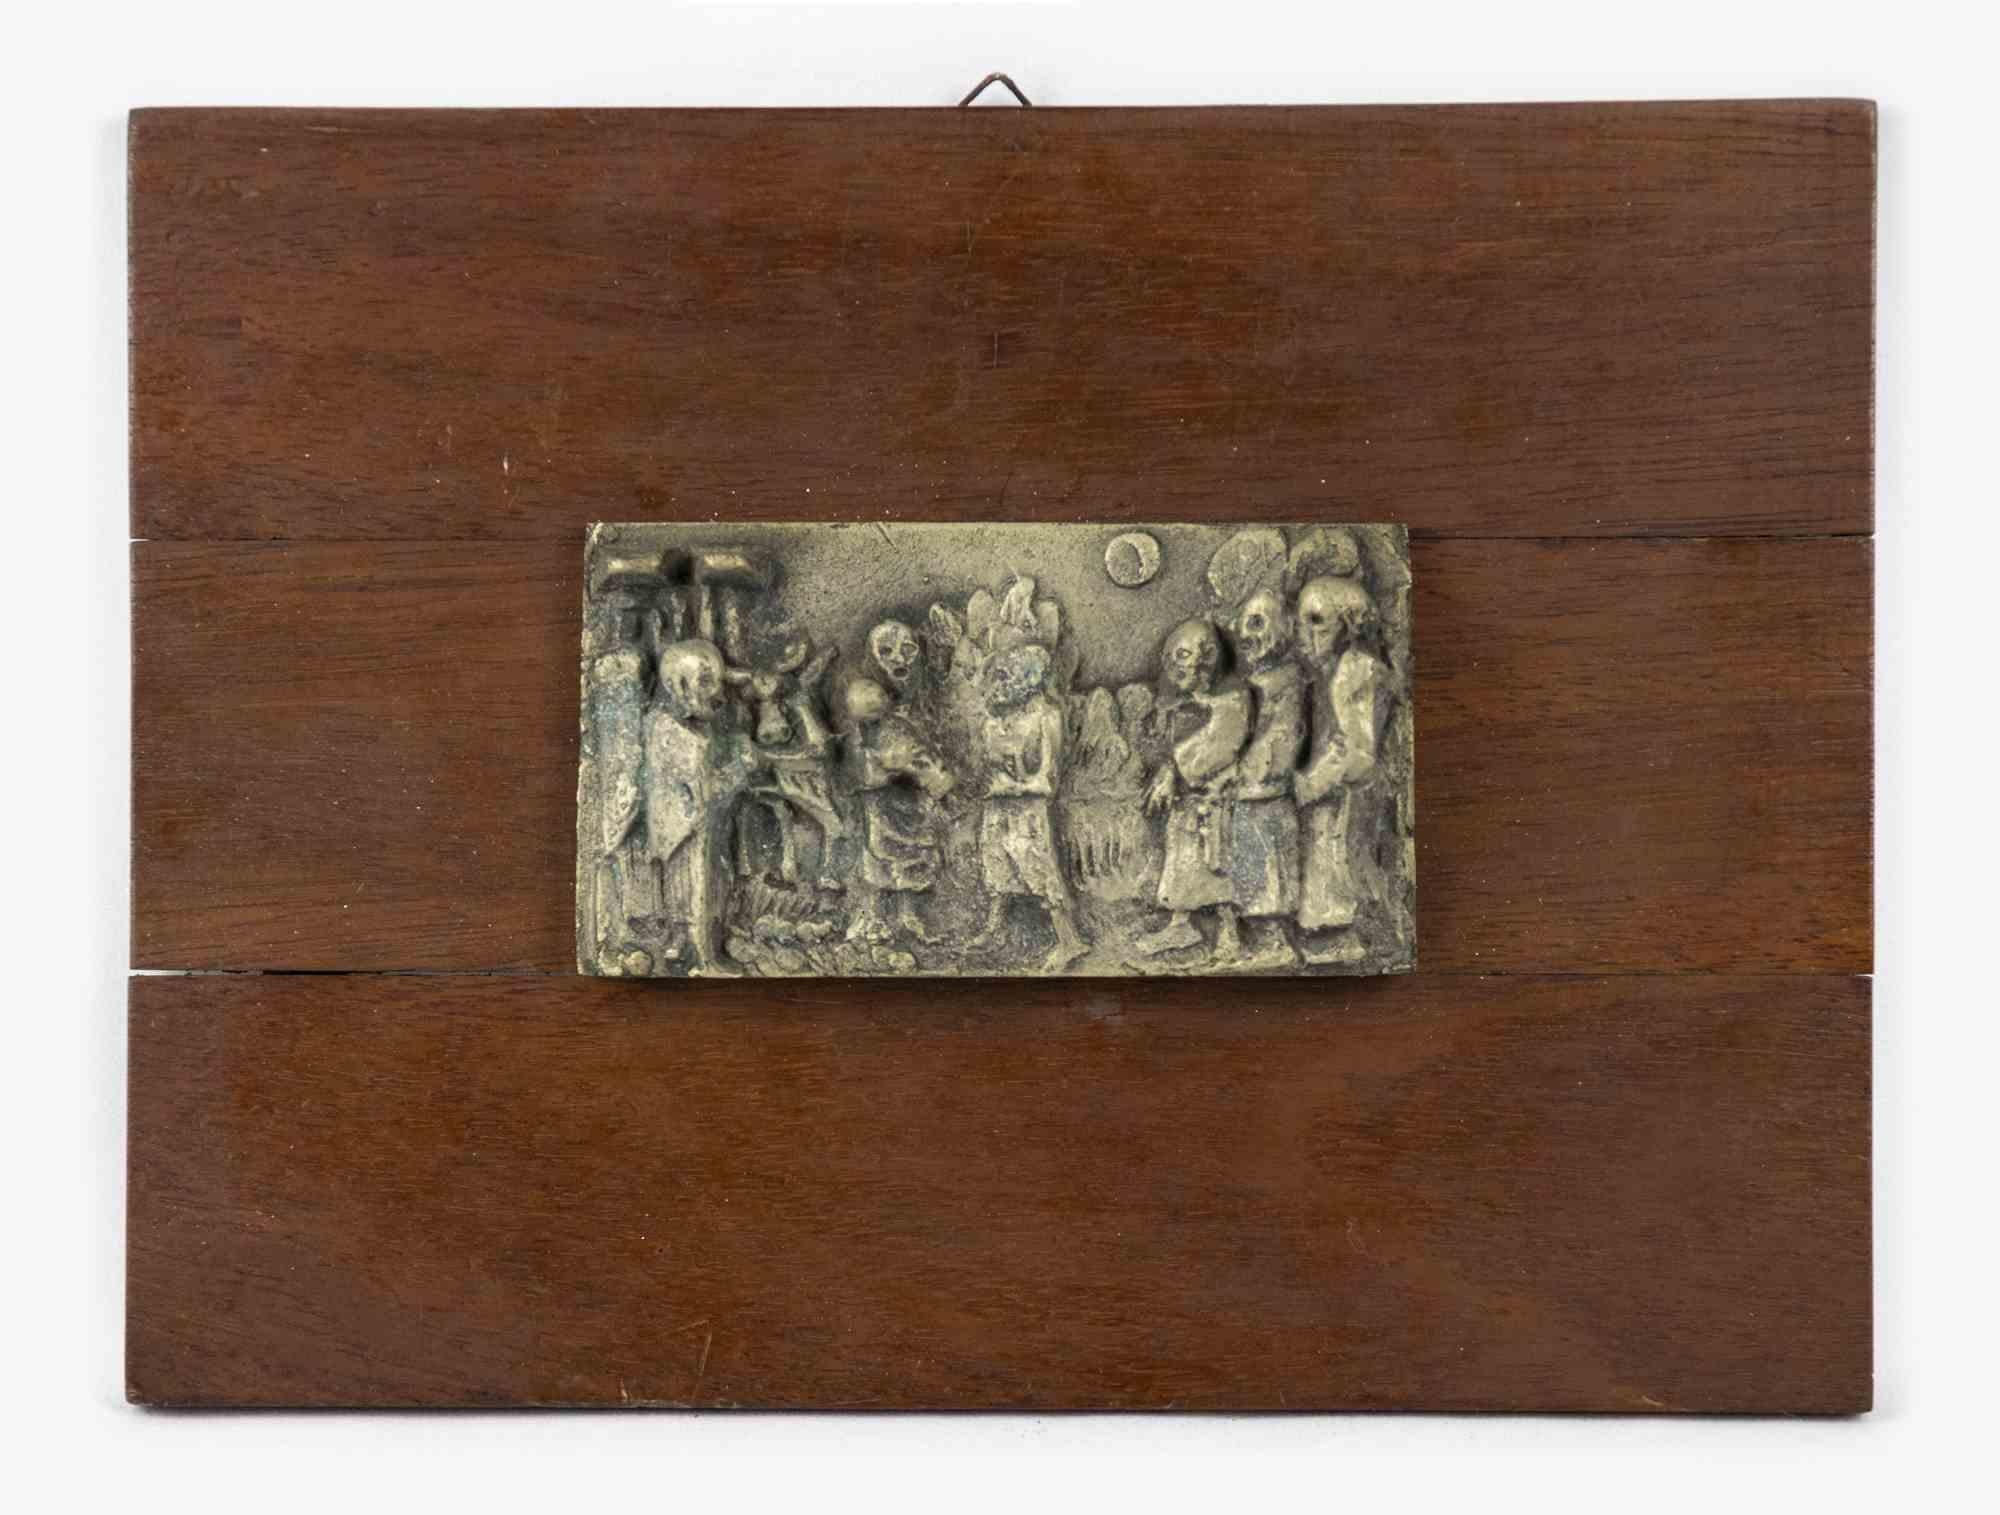 Wood base with brass relief is an original decorative object realized in the early 20th century.

Made in Italy.

The base has been realized entirely in wood and, on the top, a brass high relief depicting a procession has been applied.